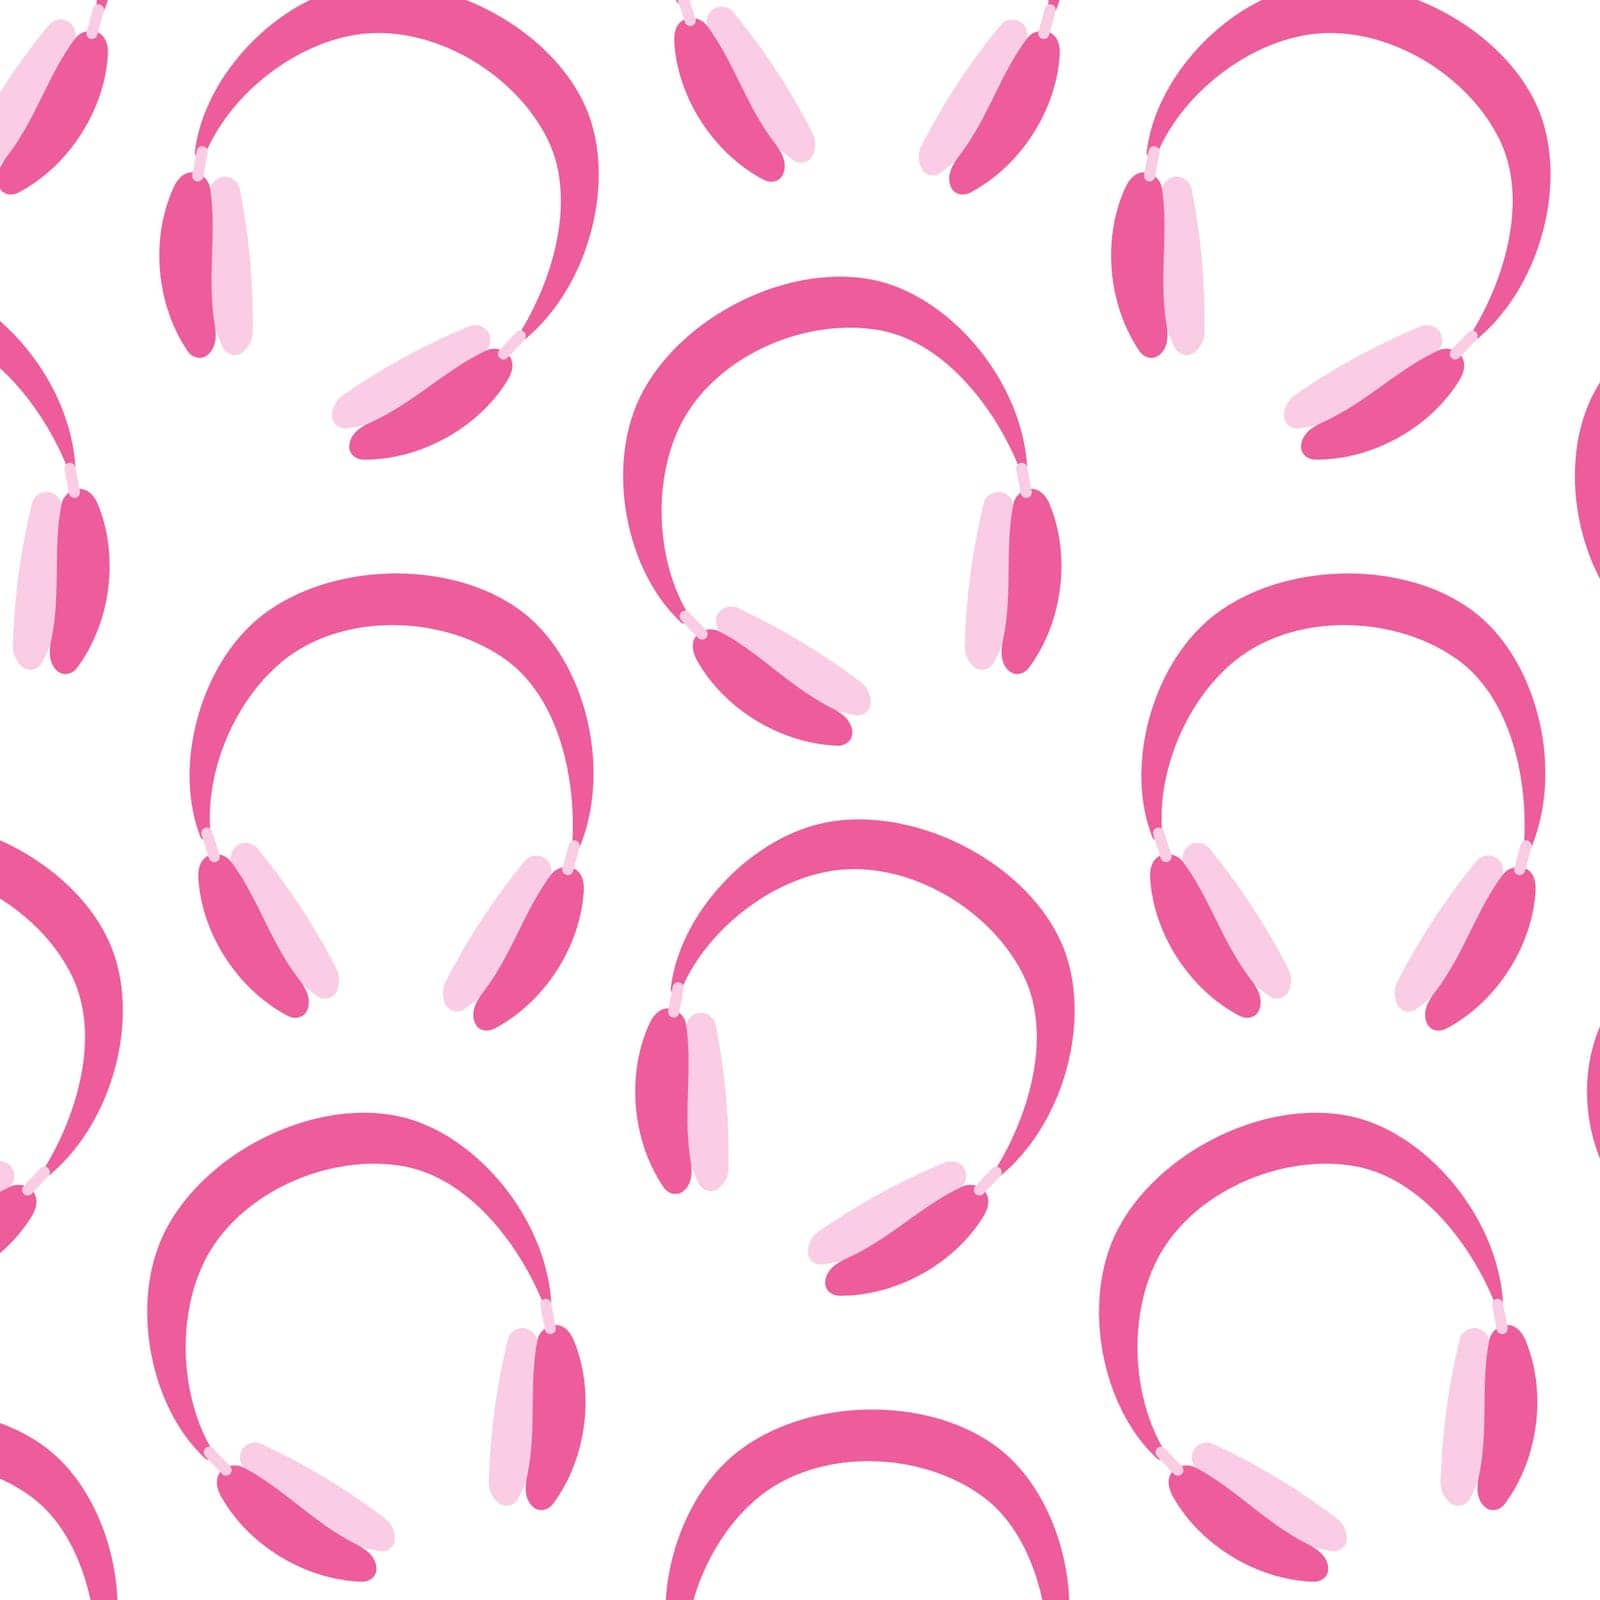 barbicore headphones pink warm doll girl accessory pattern textile background vector illustration